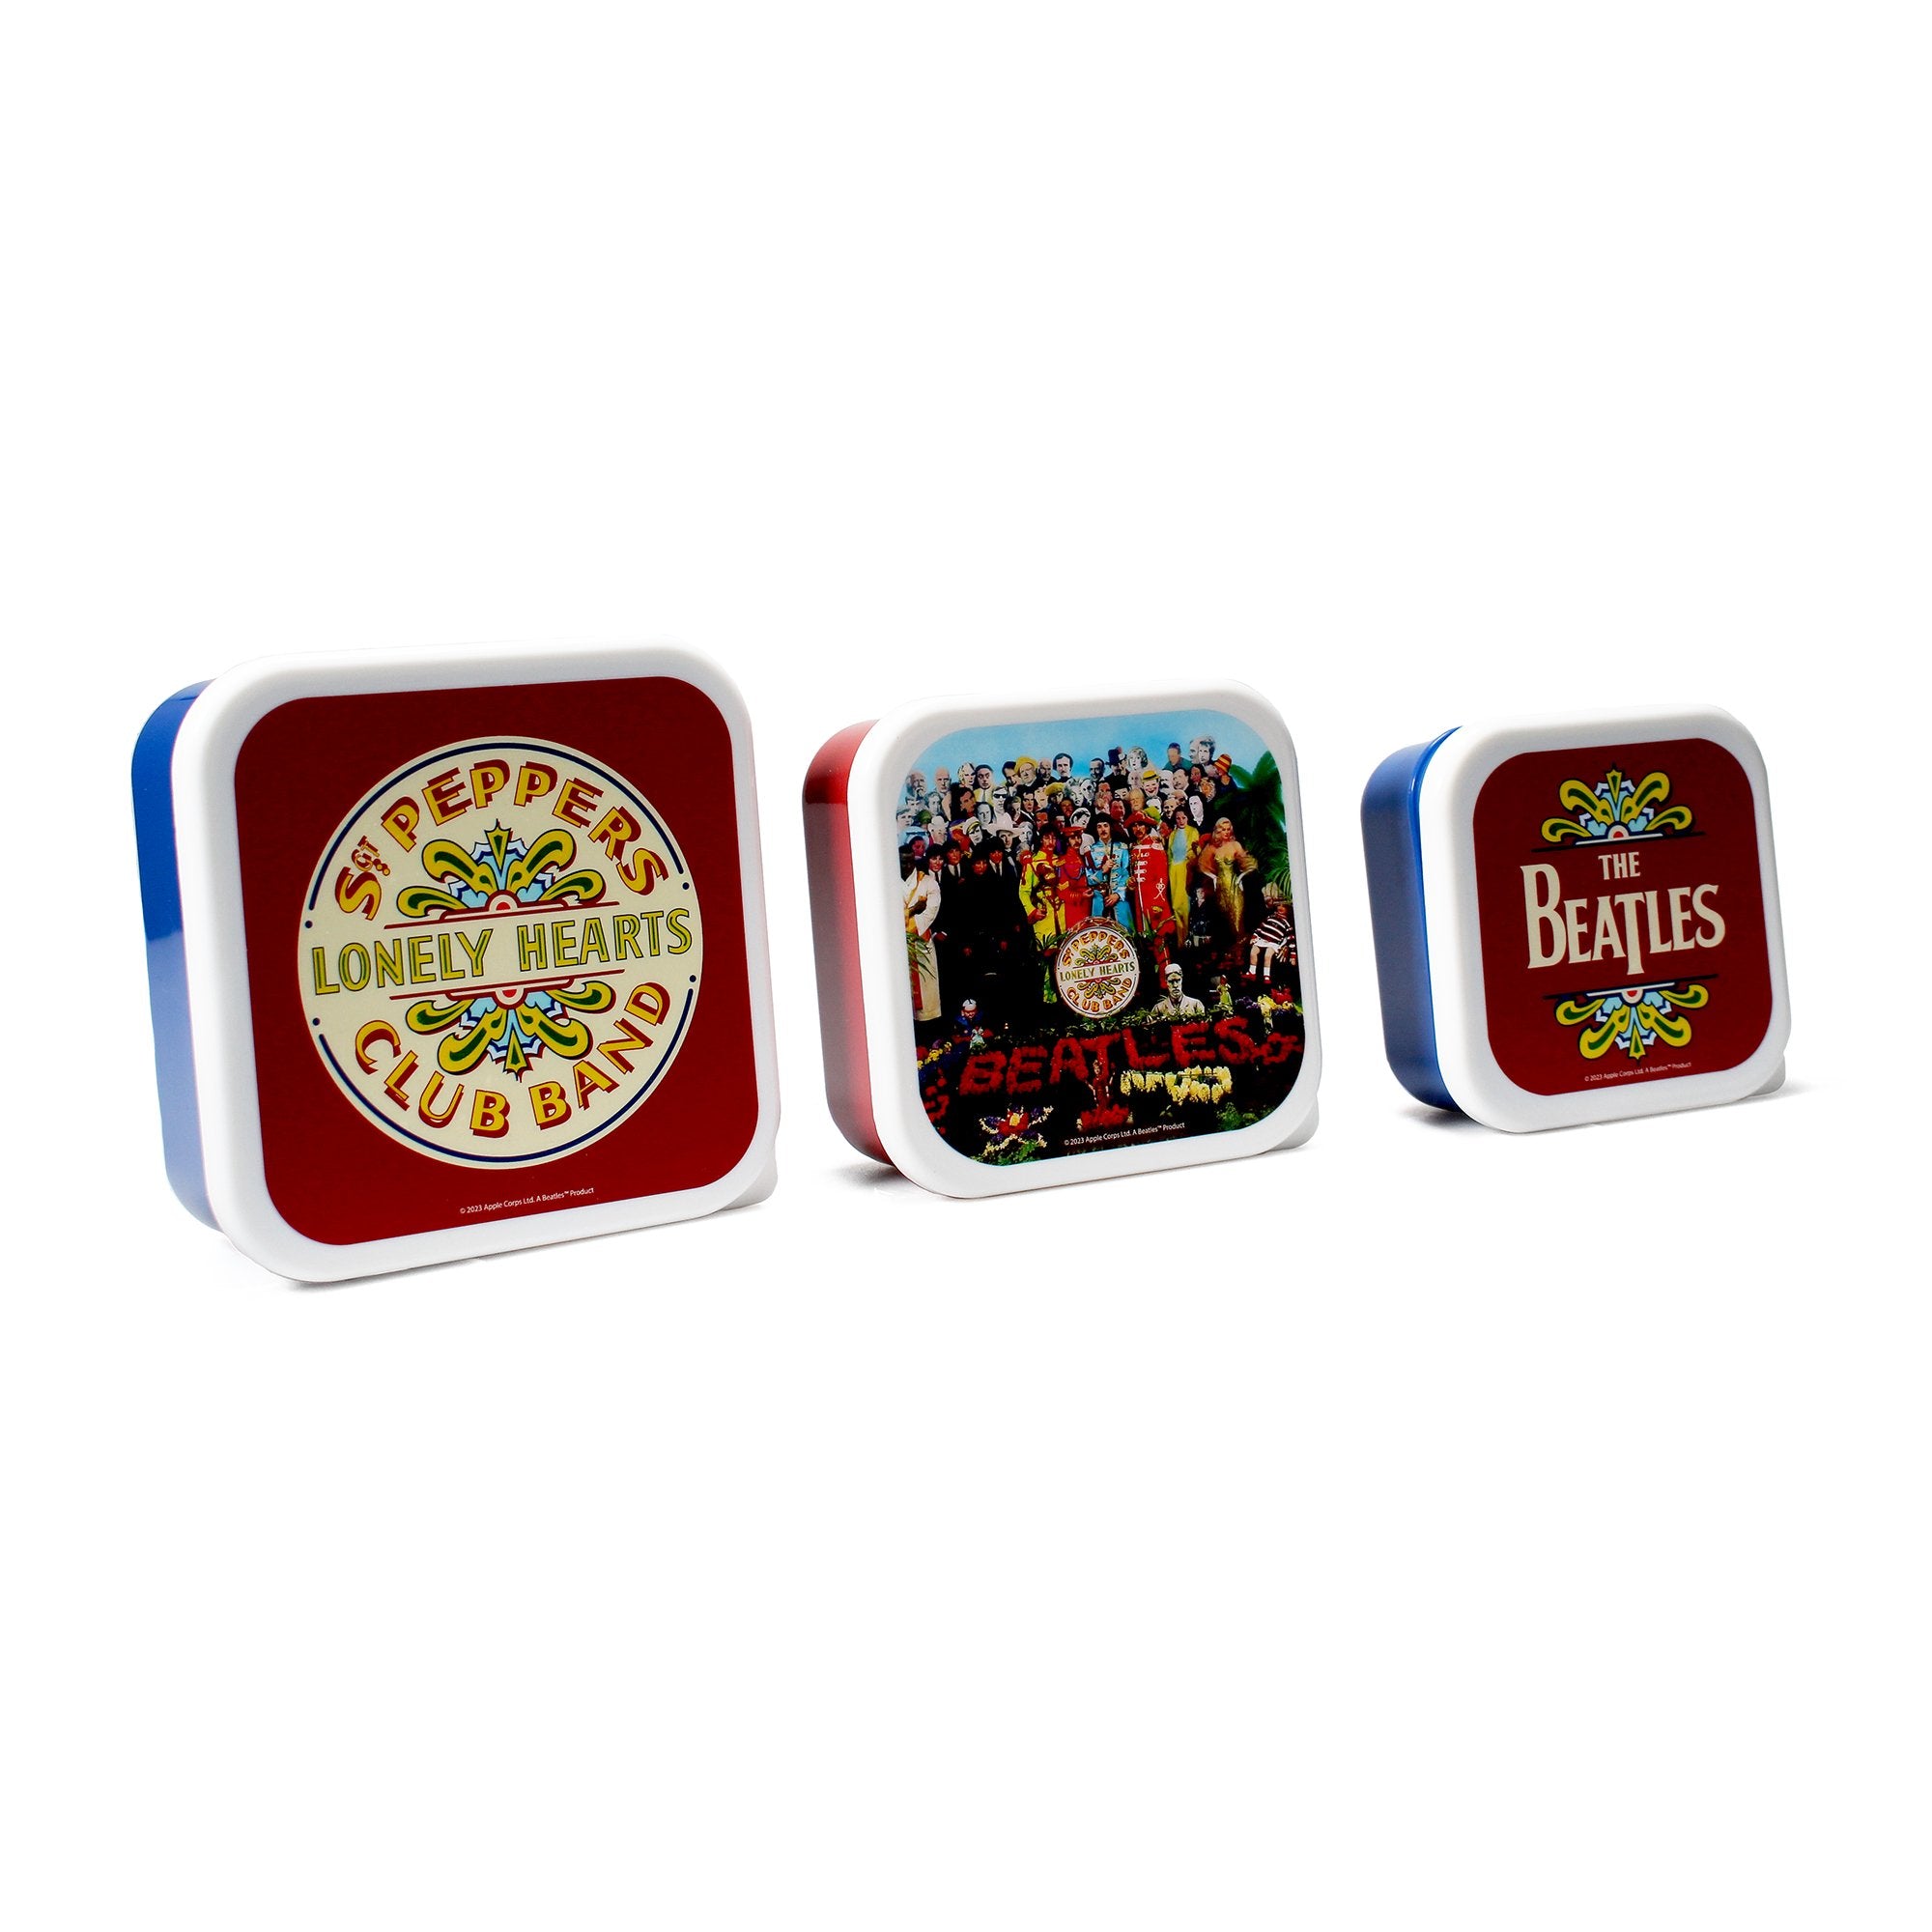 Snack Boxes Set of 3 - The Beatles (Sgt. Pepper)